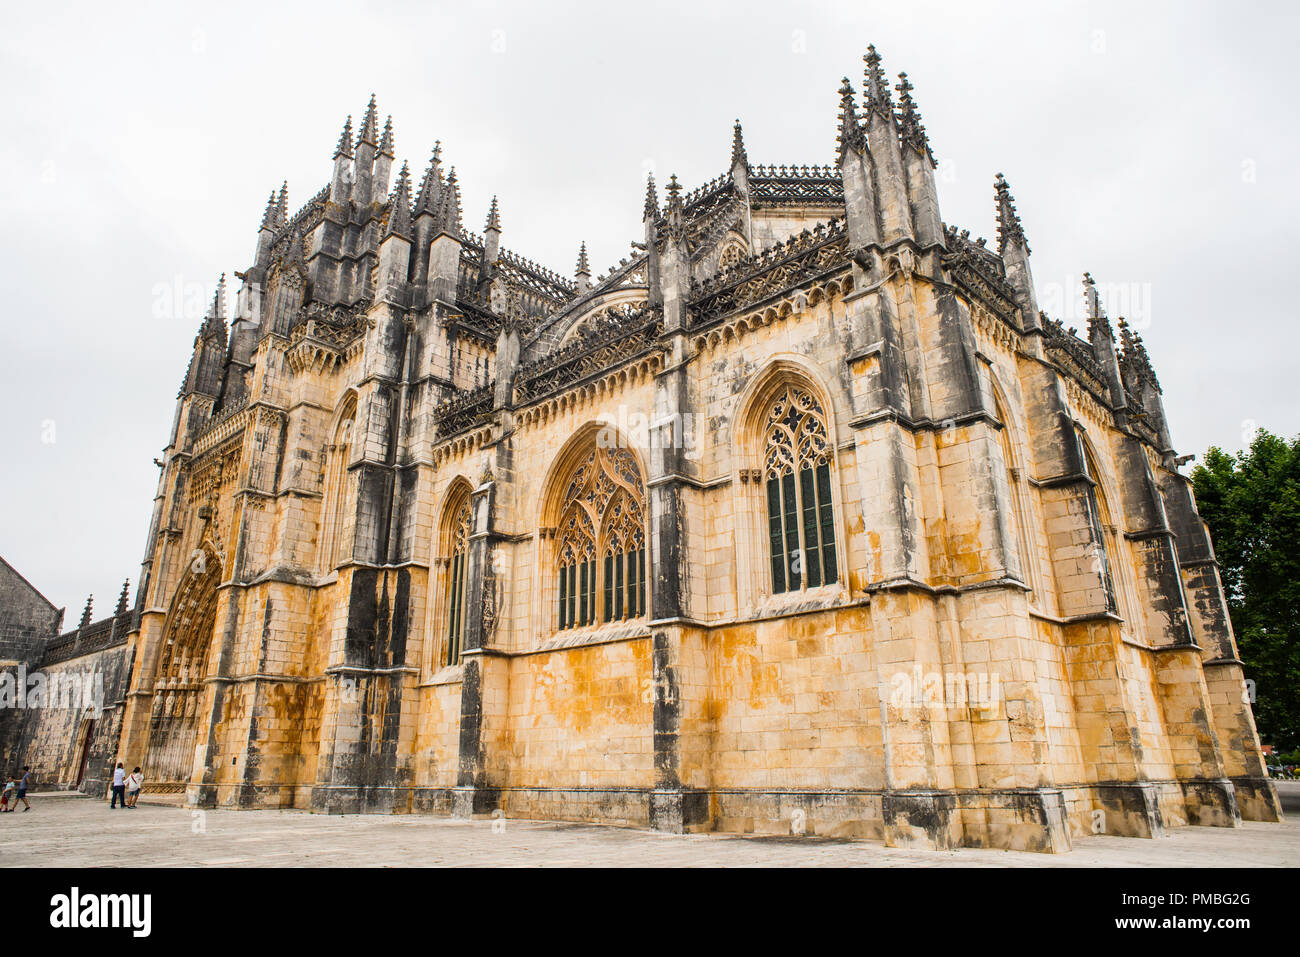 Monastery of Batalha. Ancient church started building in 1325. Batalha, Portugal, Europe Stock Photo